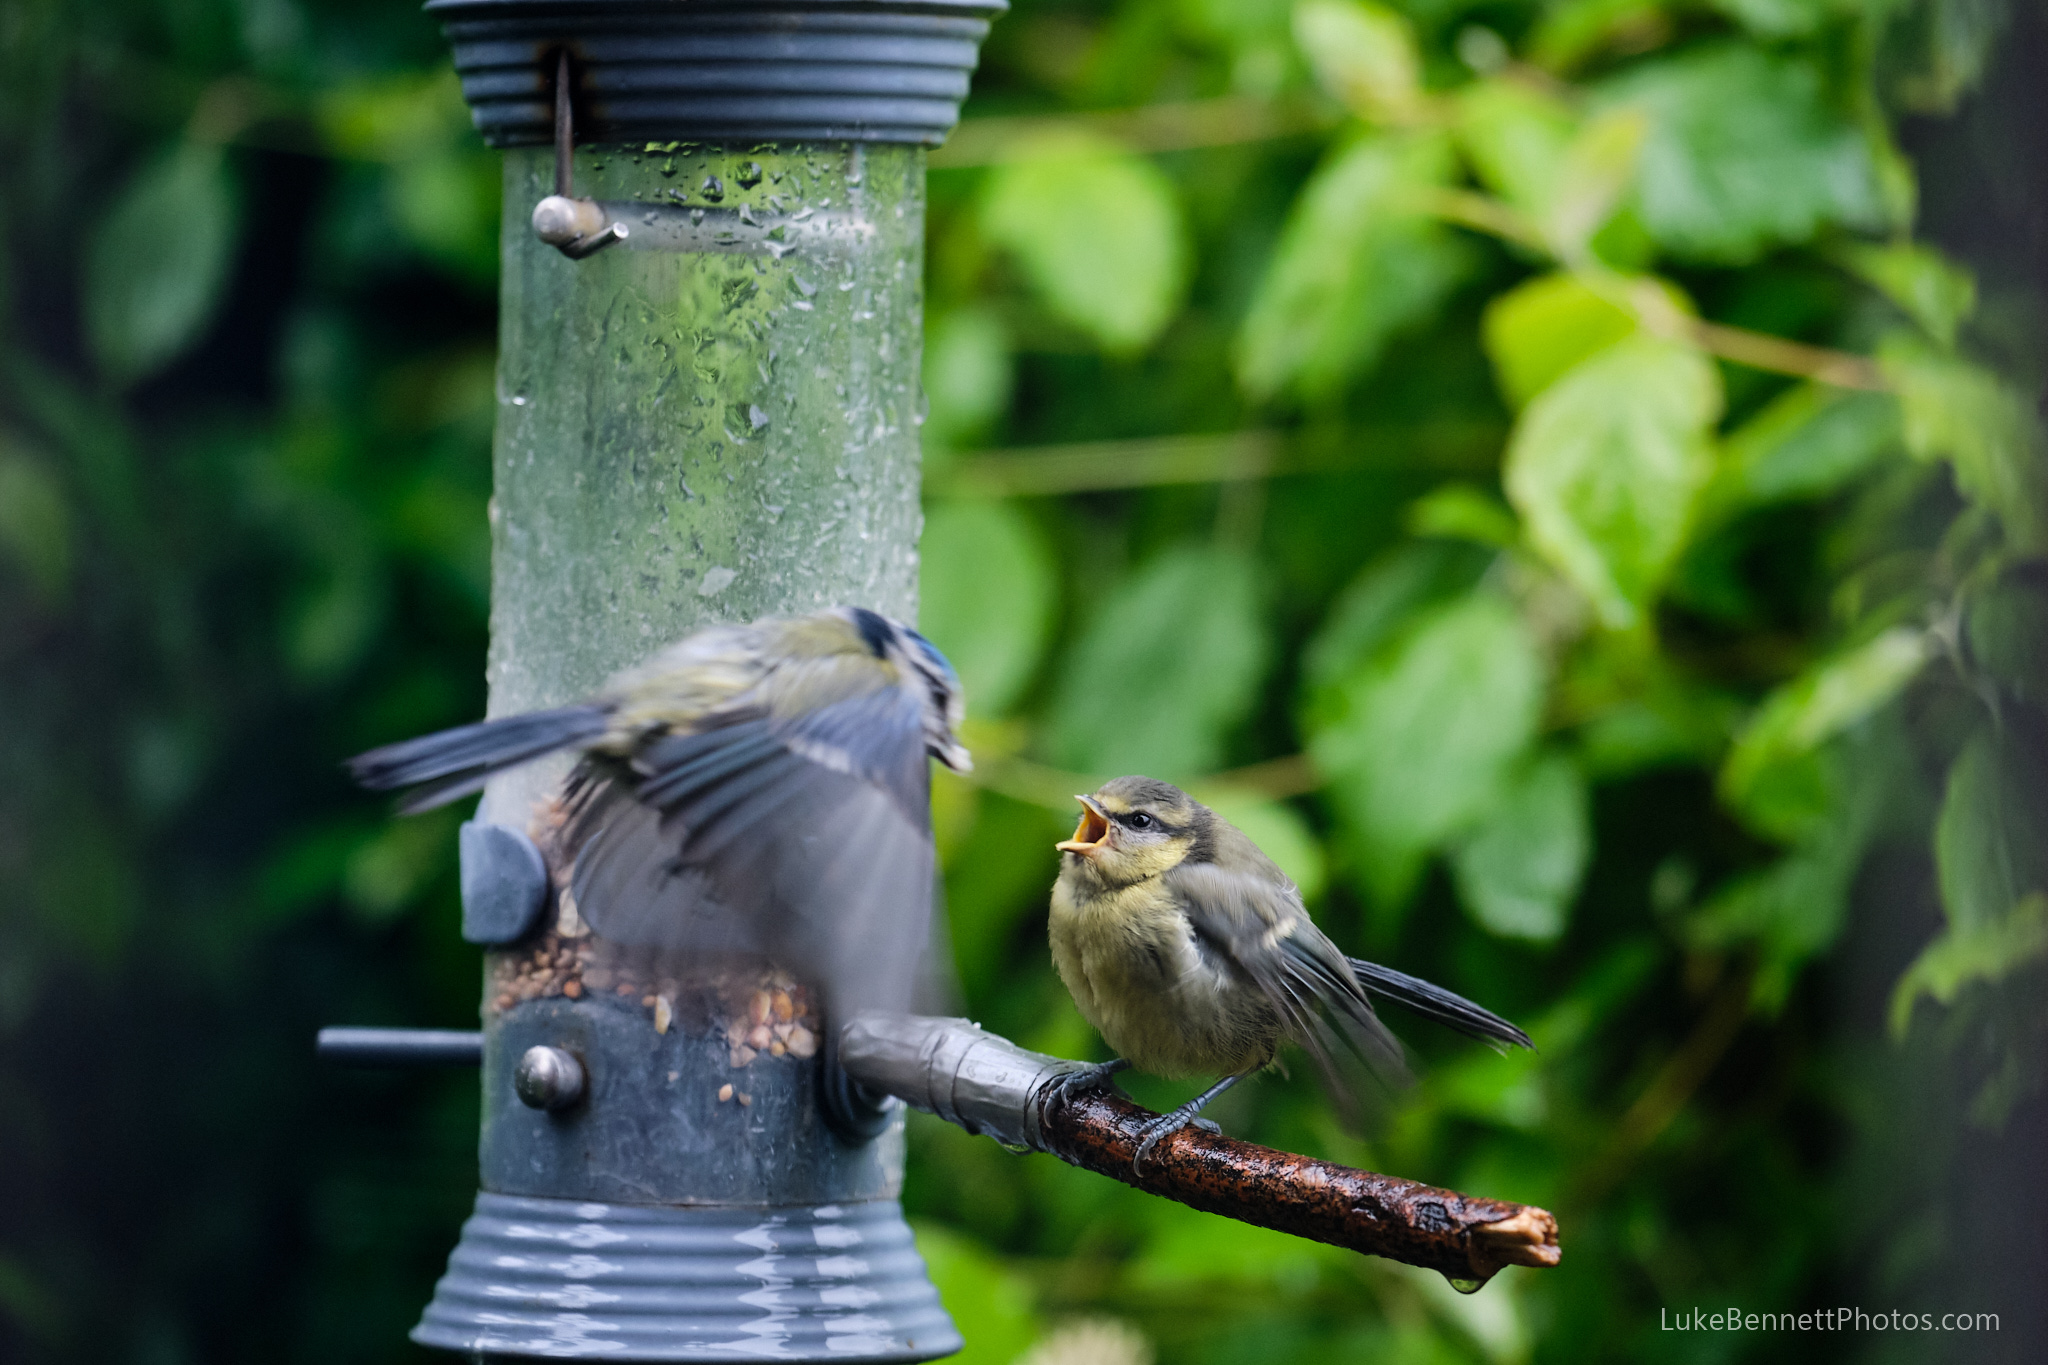 A young blue tit still being fed by their parent